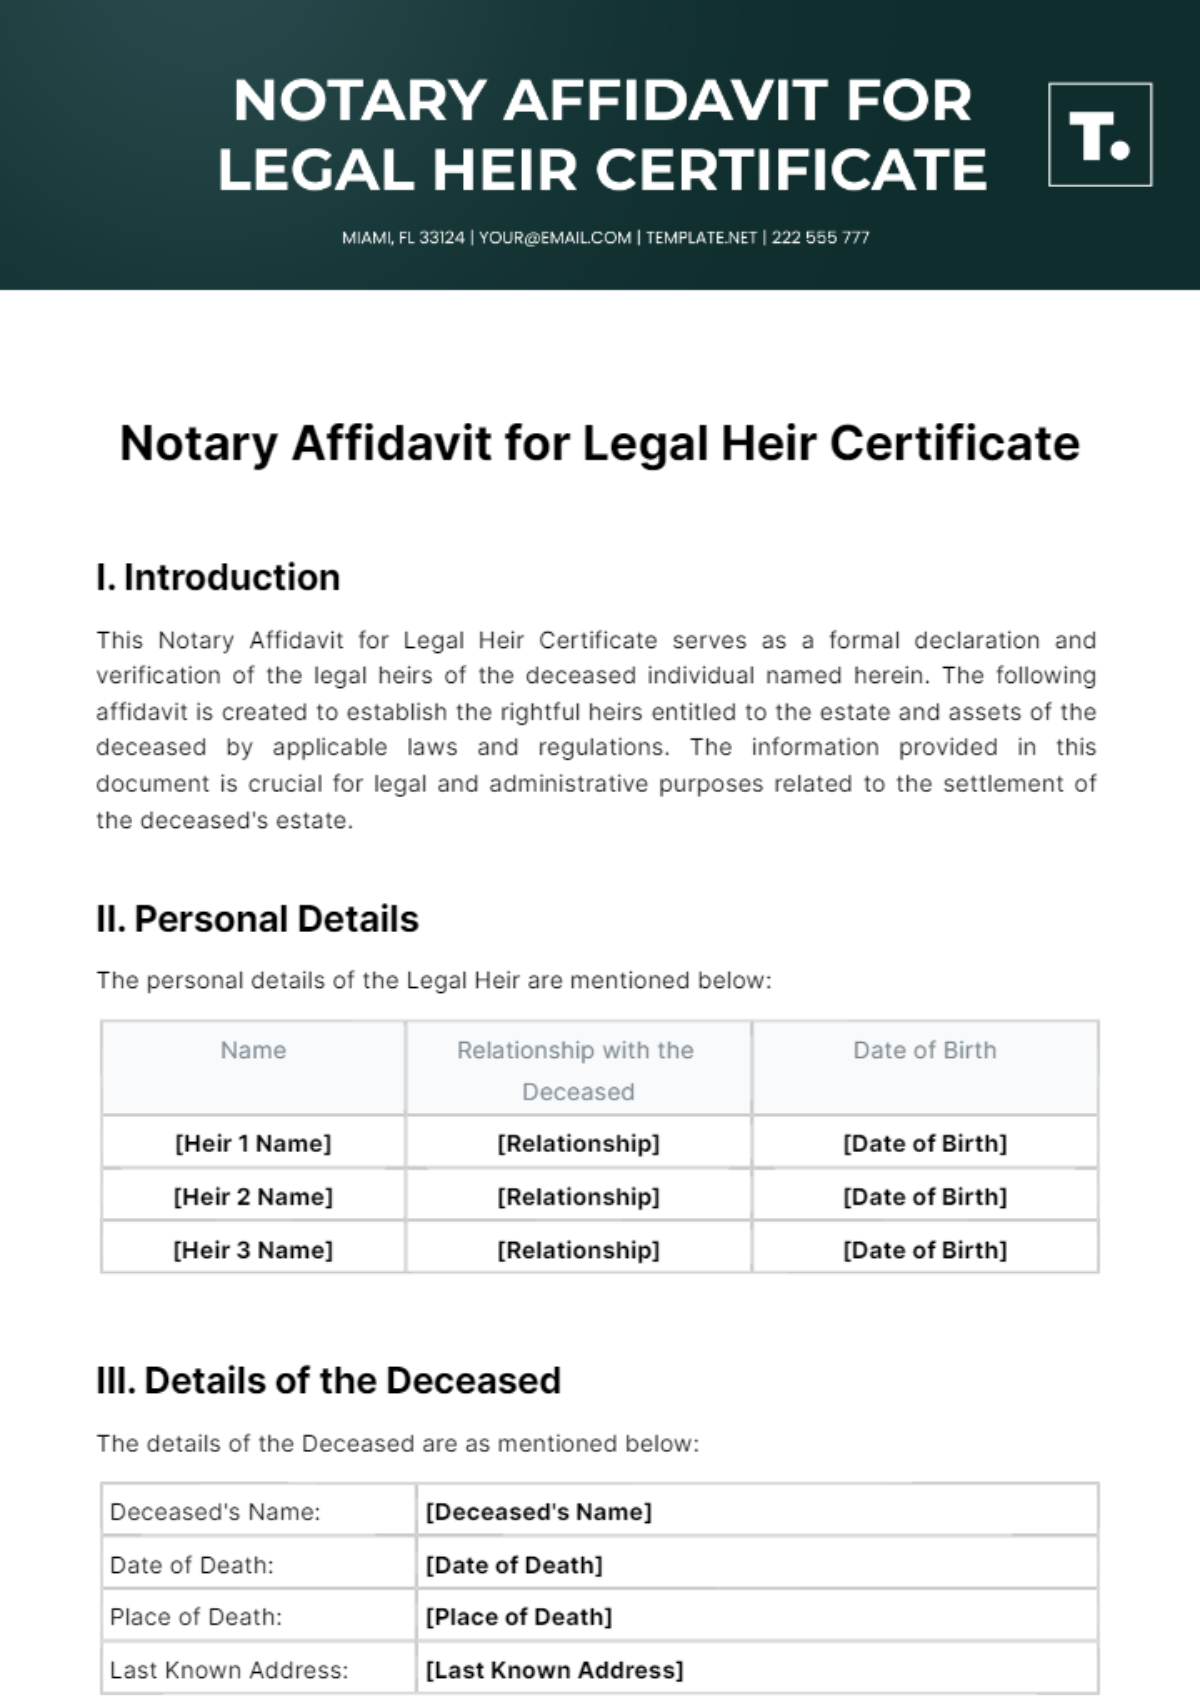 Free Notary Affidavit For Legal Heir Certificate Template